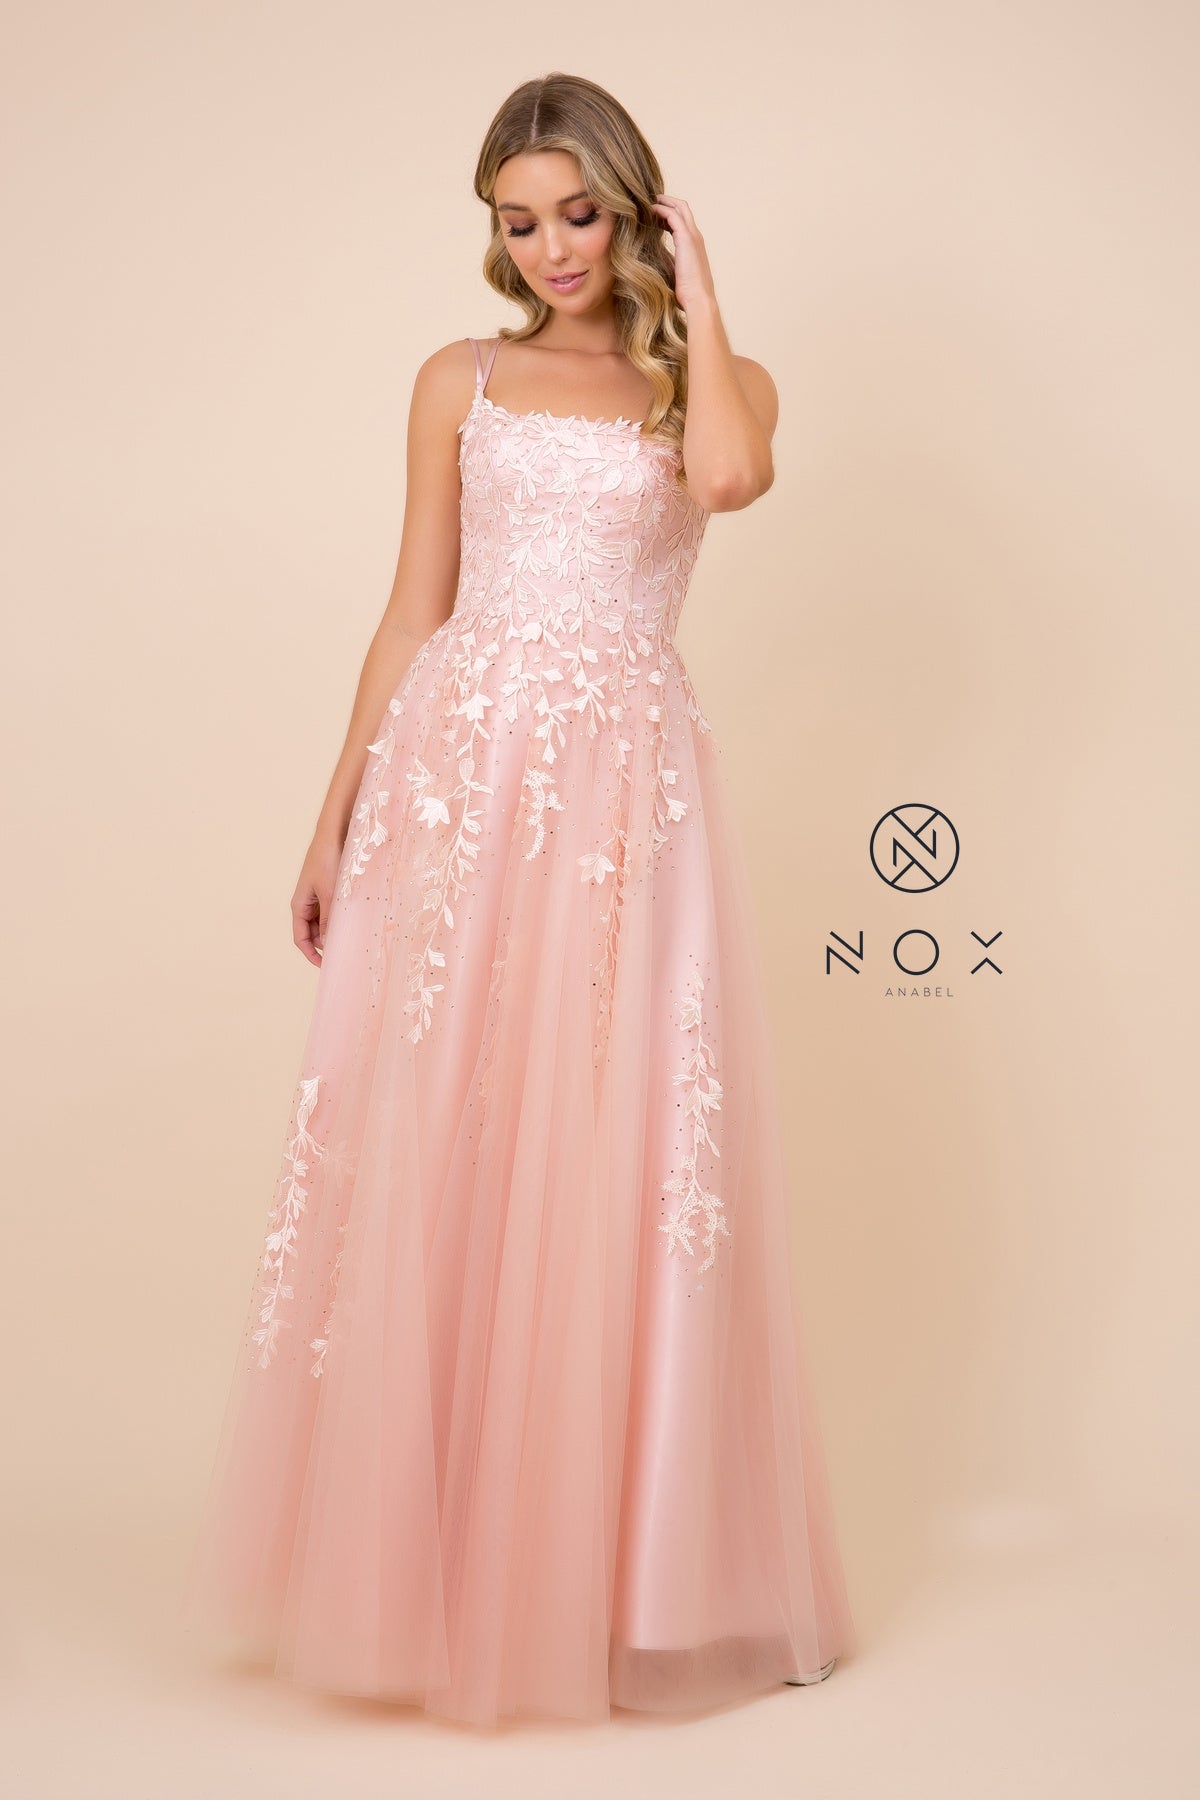 MyFashion.com - FLOOR-LENGTH DRESS WITH FLORAL DESIGN AND SPAGHETTI STRAPS (C415) - Nox Anabel promdress eveningdress fashion partydress weddingdress 
 gown homecoming promgown weddinggown 